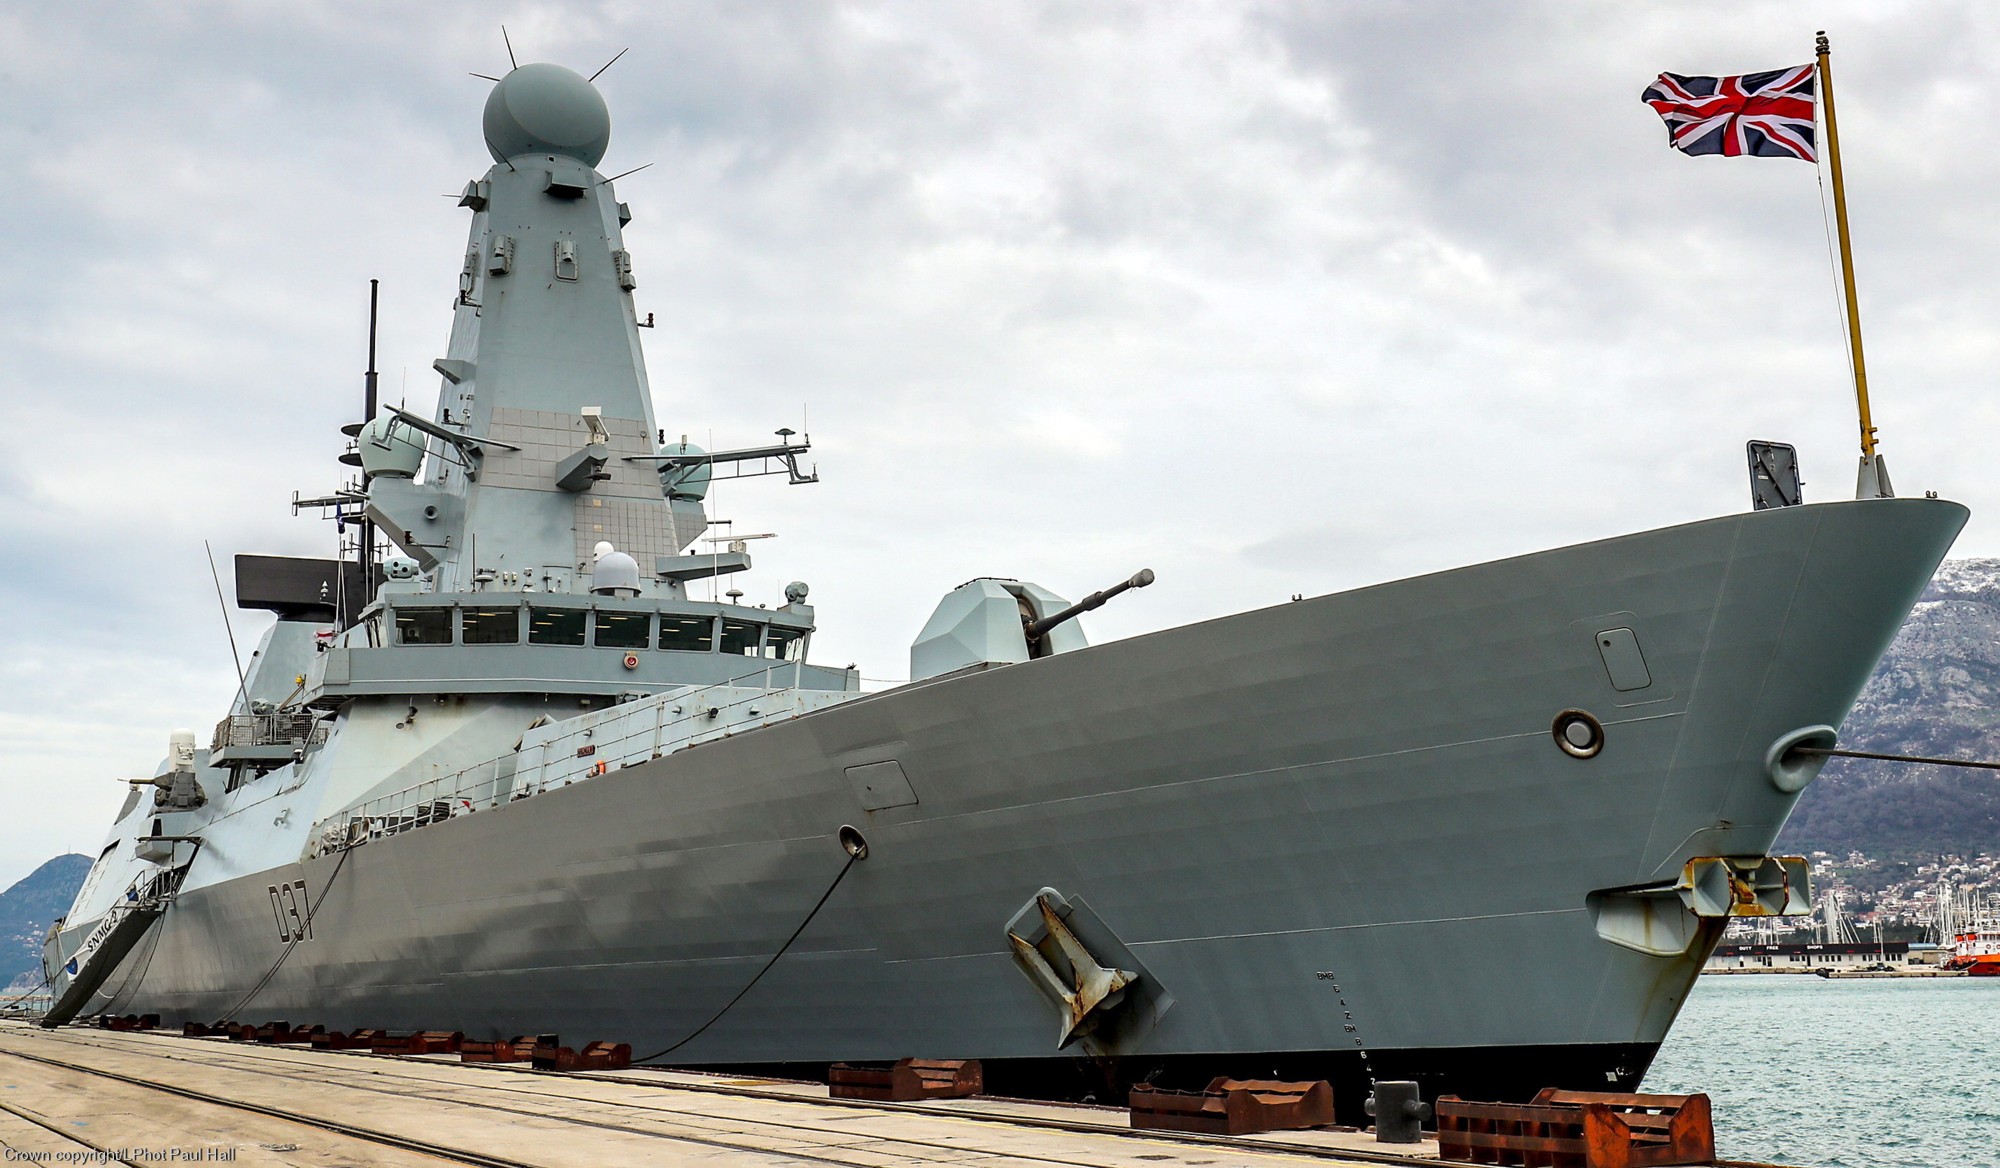 d37 hms duncan d-37 type 45 daring class guided missile destroyer ddg royal navy sea viper 58